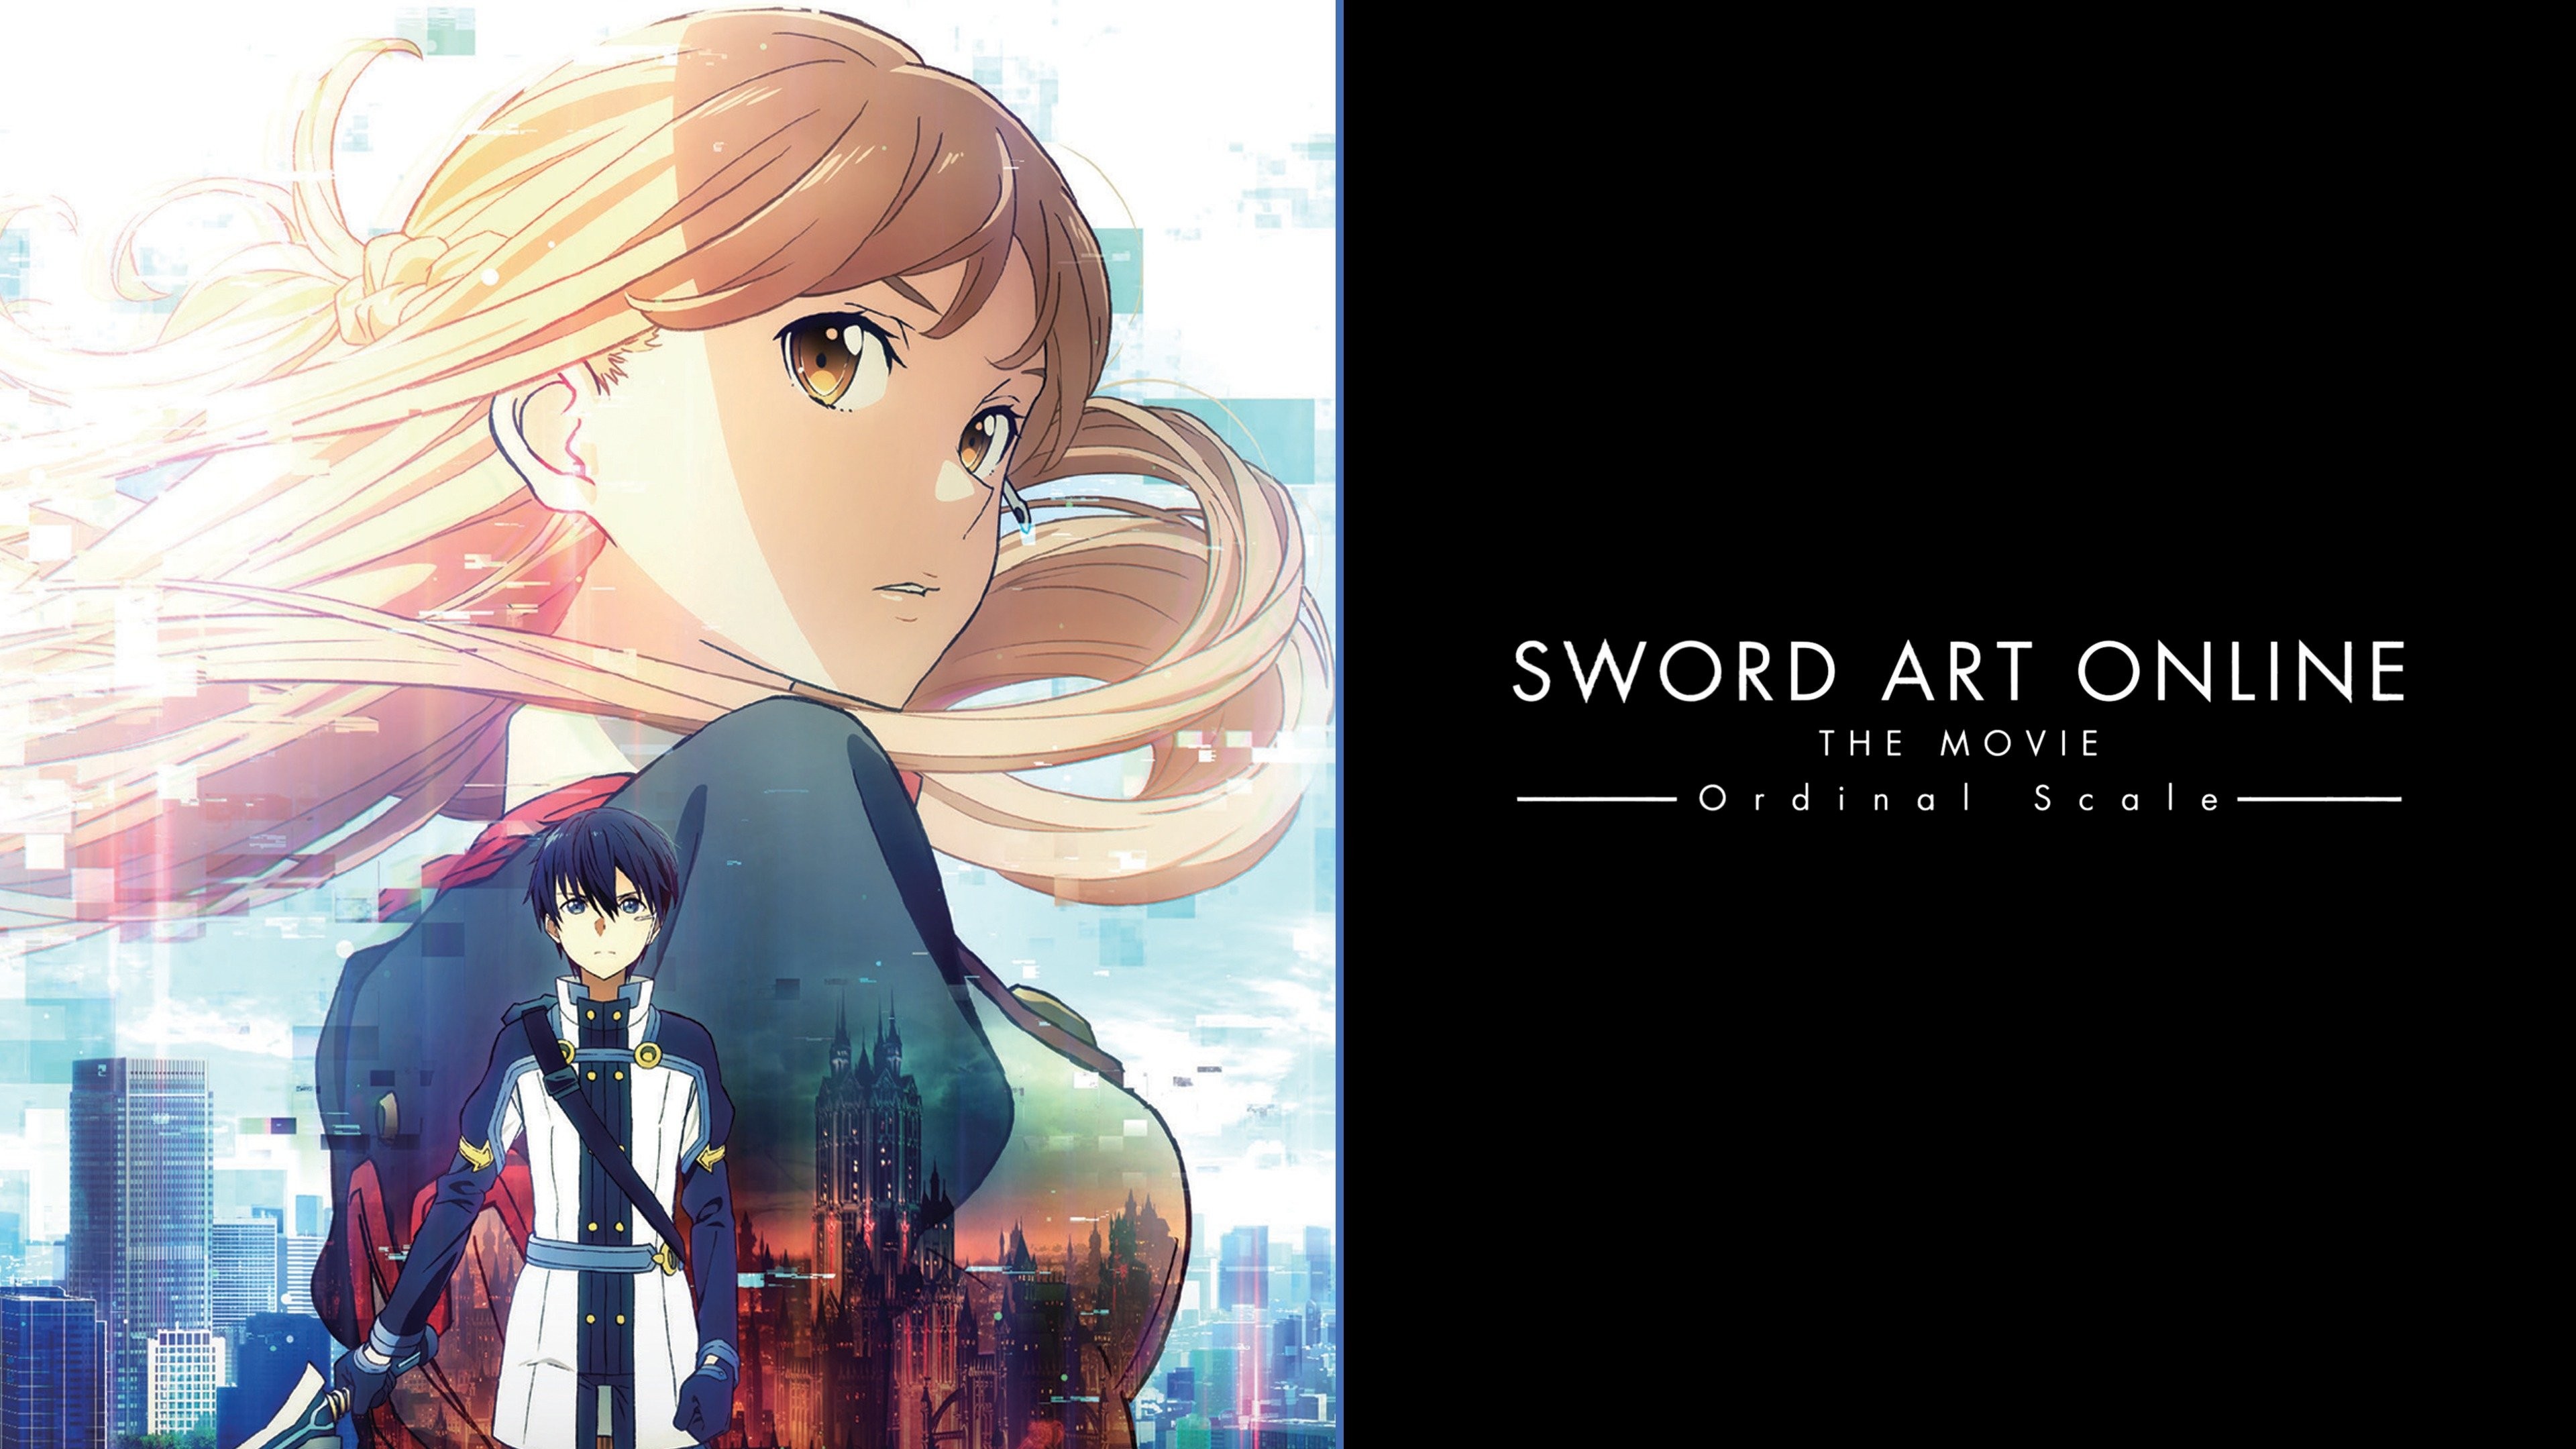 Sword Art Online' season 3 release date news: Series might air on Netflix;  animated movie 'Ordinal Scale' set for a 2017 release